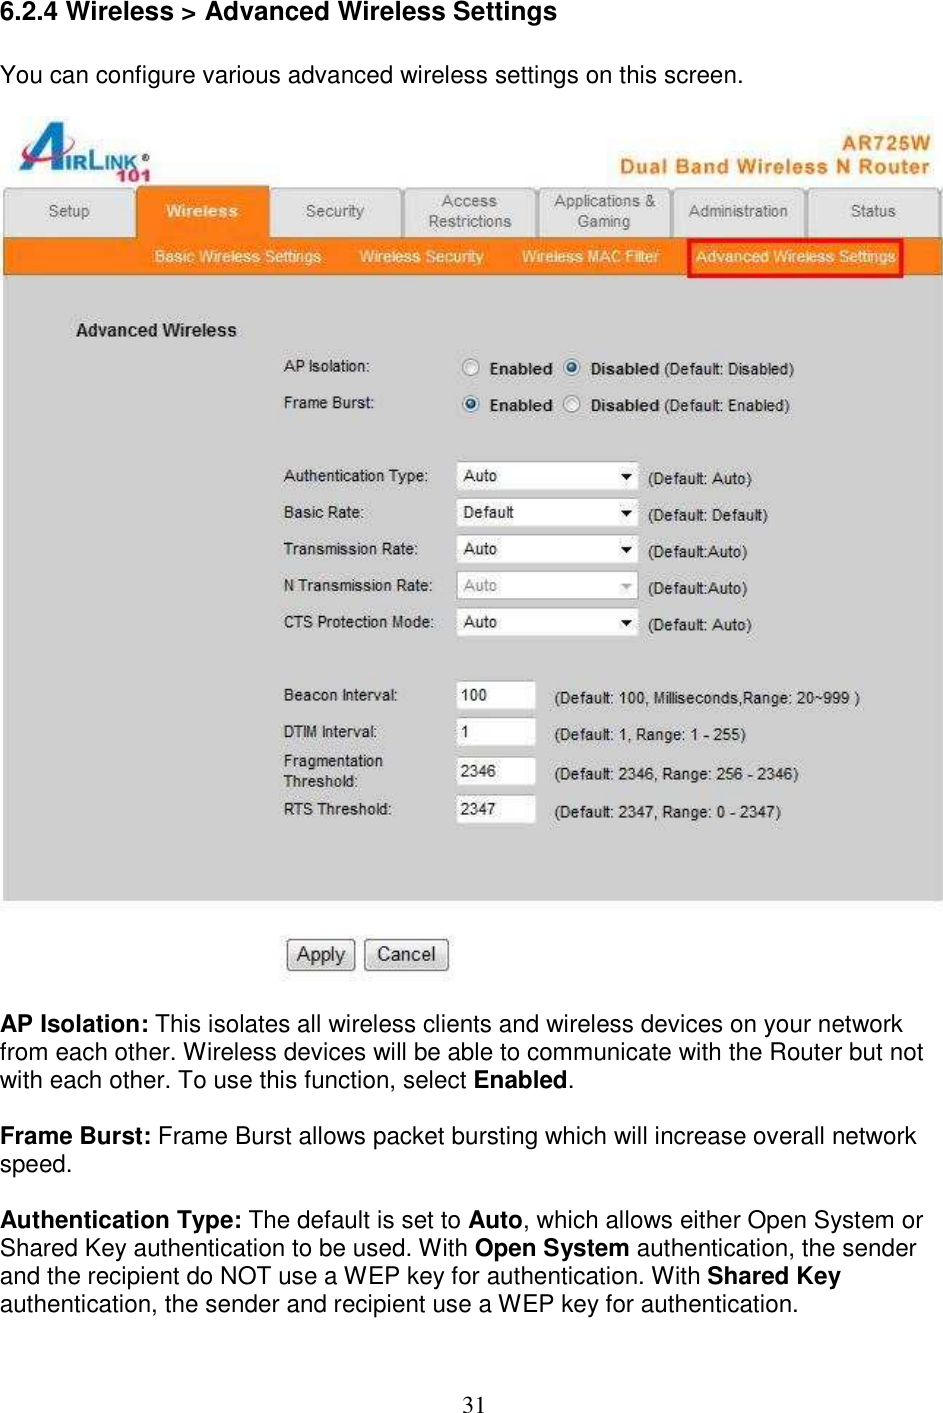 31 6.2.4 Wireless &gt; Advanced Wireless Settings  You can configure various advanced wireless settings on this screen.    AP Isolation: This isolates all wireless clients and wireless devices on your network from each other. Wireless devices will be able to communicate with the Router but not with each other. To use this function, select Enabled.   Frame Burst: Frame Burst allows packet bursting which will increase overall network speed.  Authentication Type: The default is set to Auto, which allows either Open System or Shared Key authentication to be used. With Open System authentication, the sender and the recipient do NOT use a WEP key for authentication. With Shared Key authentication, the sender and recipient use a WEP key for authentication.  